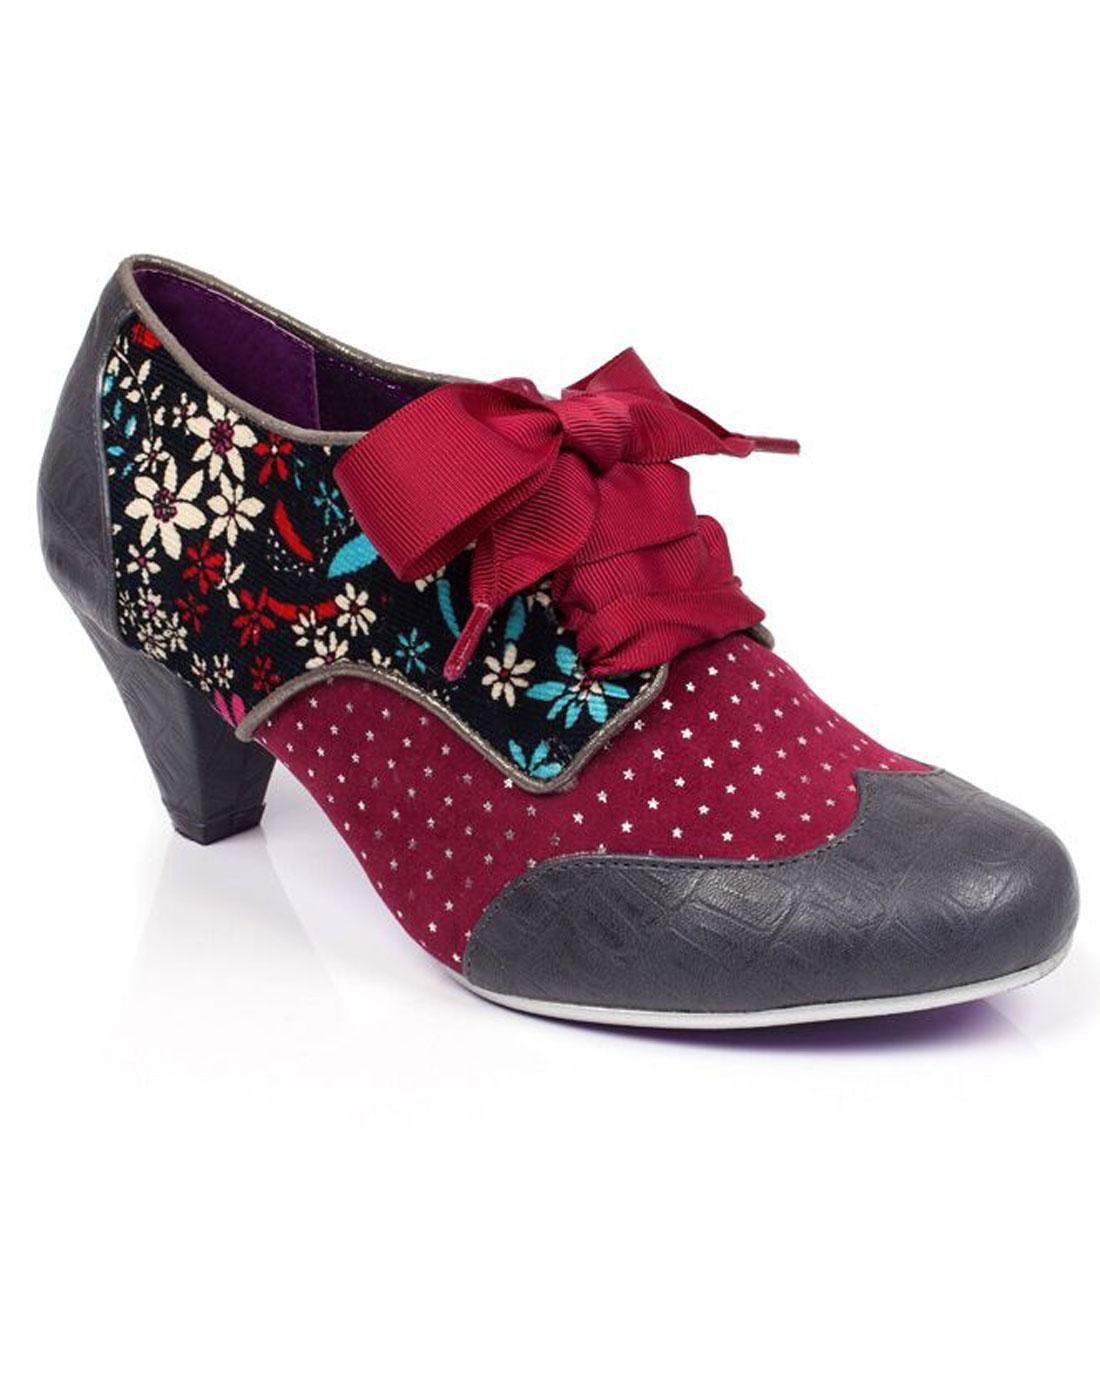 End Of Story POETIC LICENCE Cord Floral Star Heels